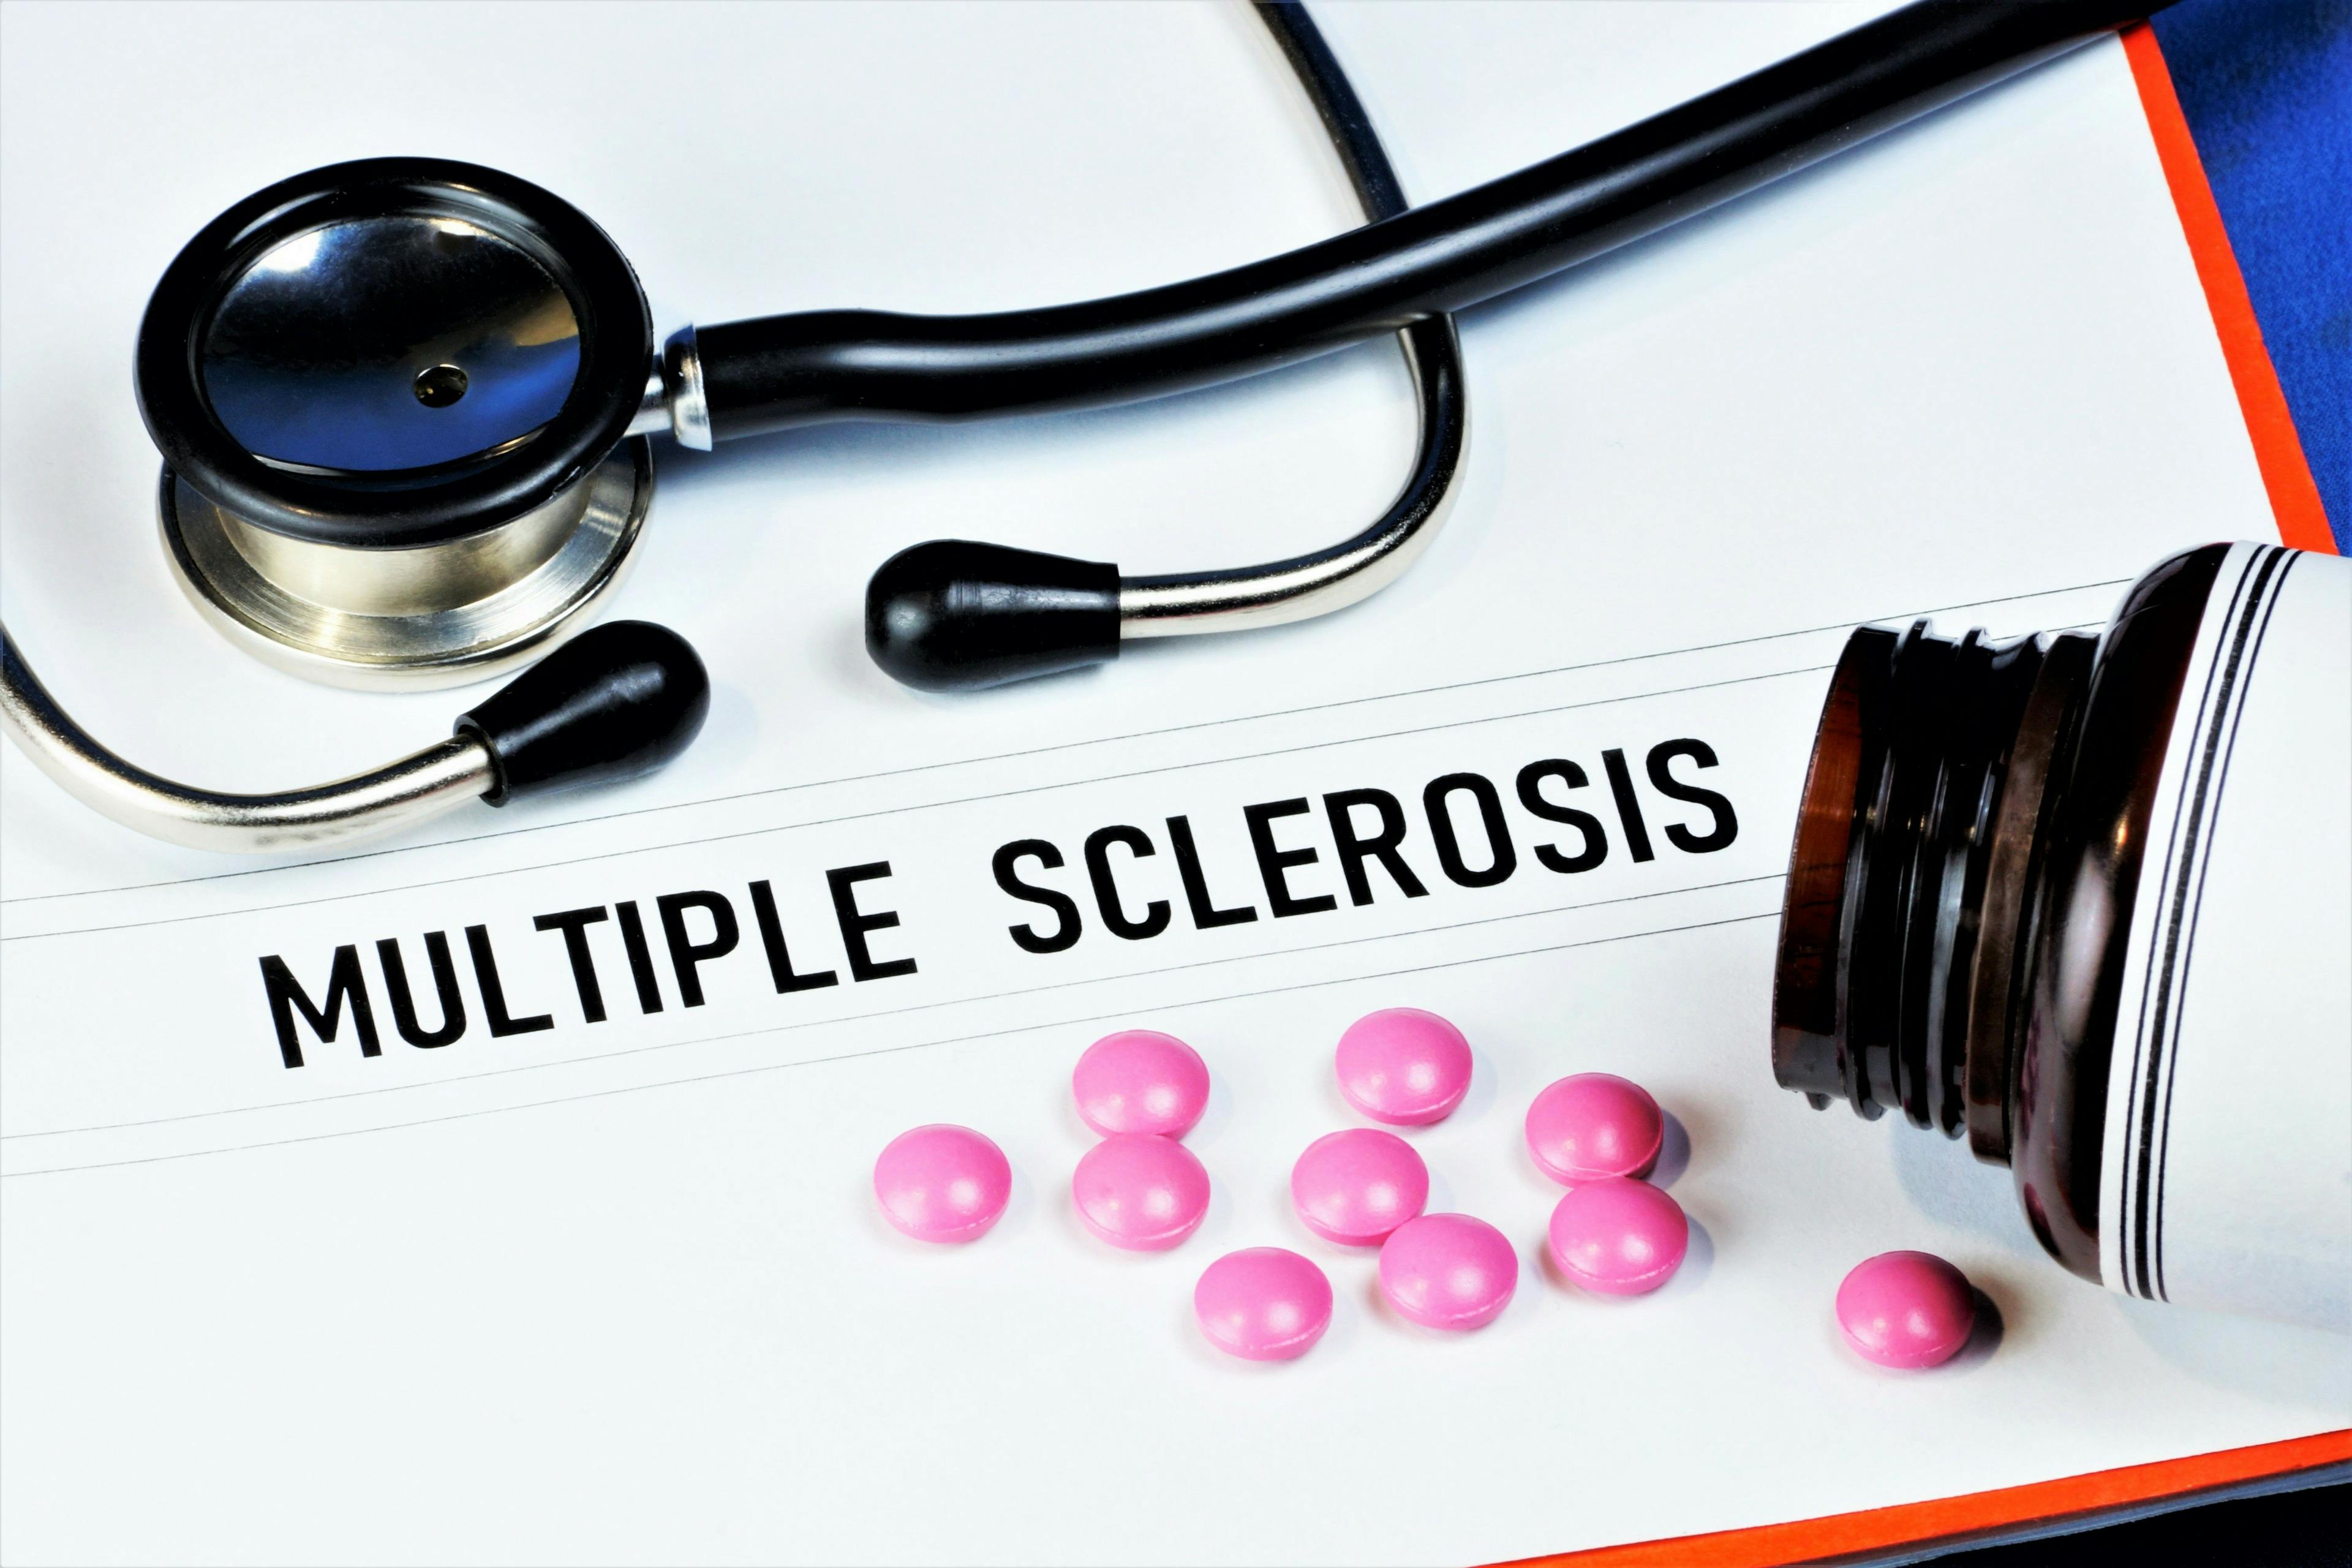 Multiple sclerosis image with a stethoscope and pills, medication image